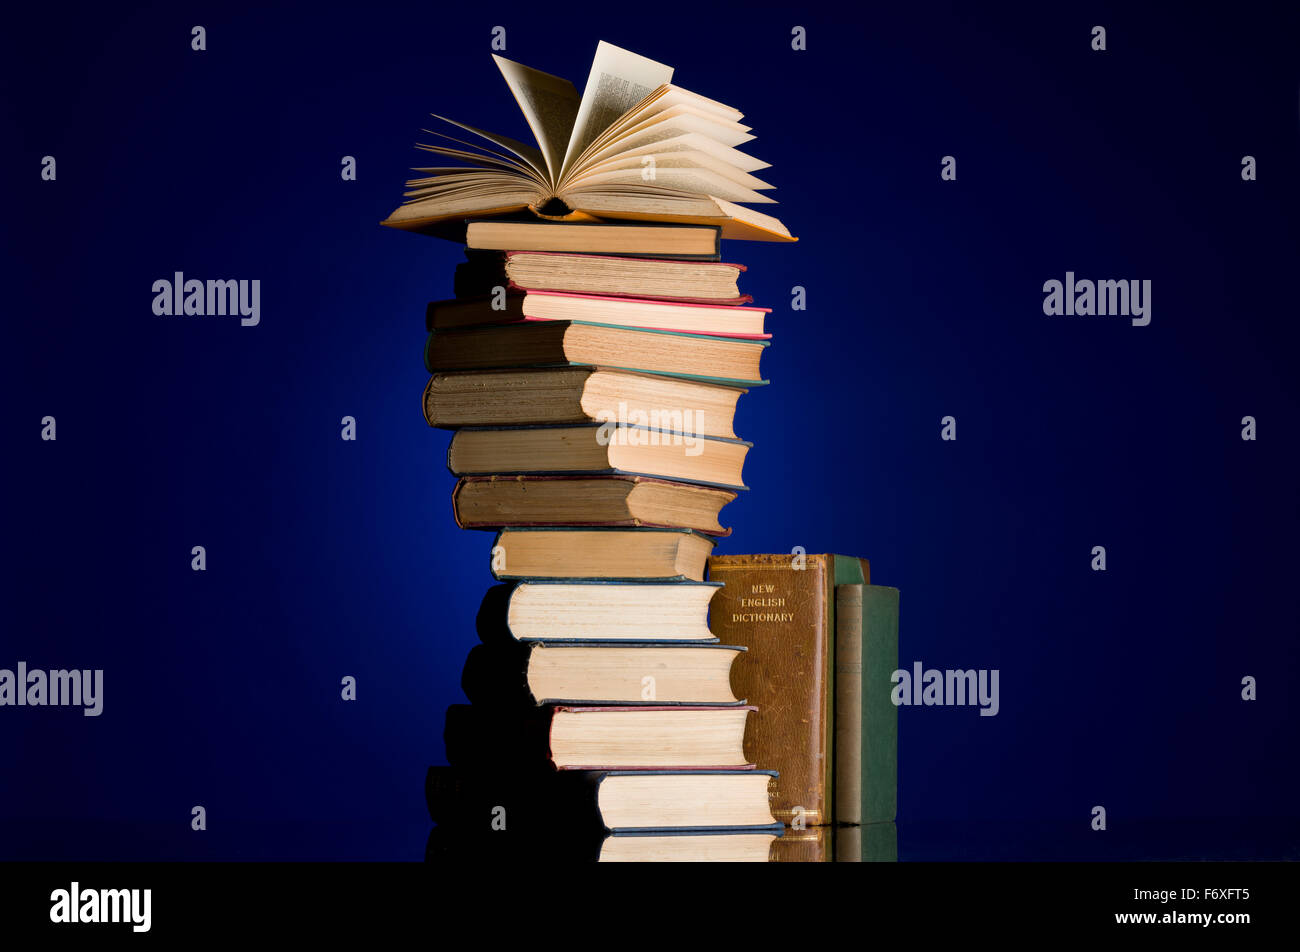 Pile of old books in a spiral twist. Open book at the top of the pile. Book collection. Read, education metaphor. Stock Photo